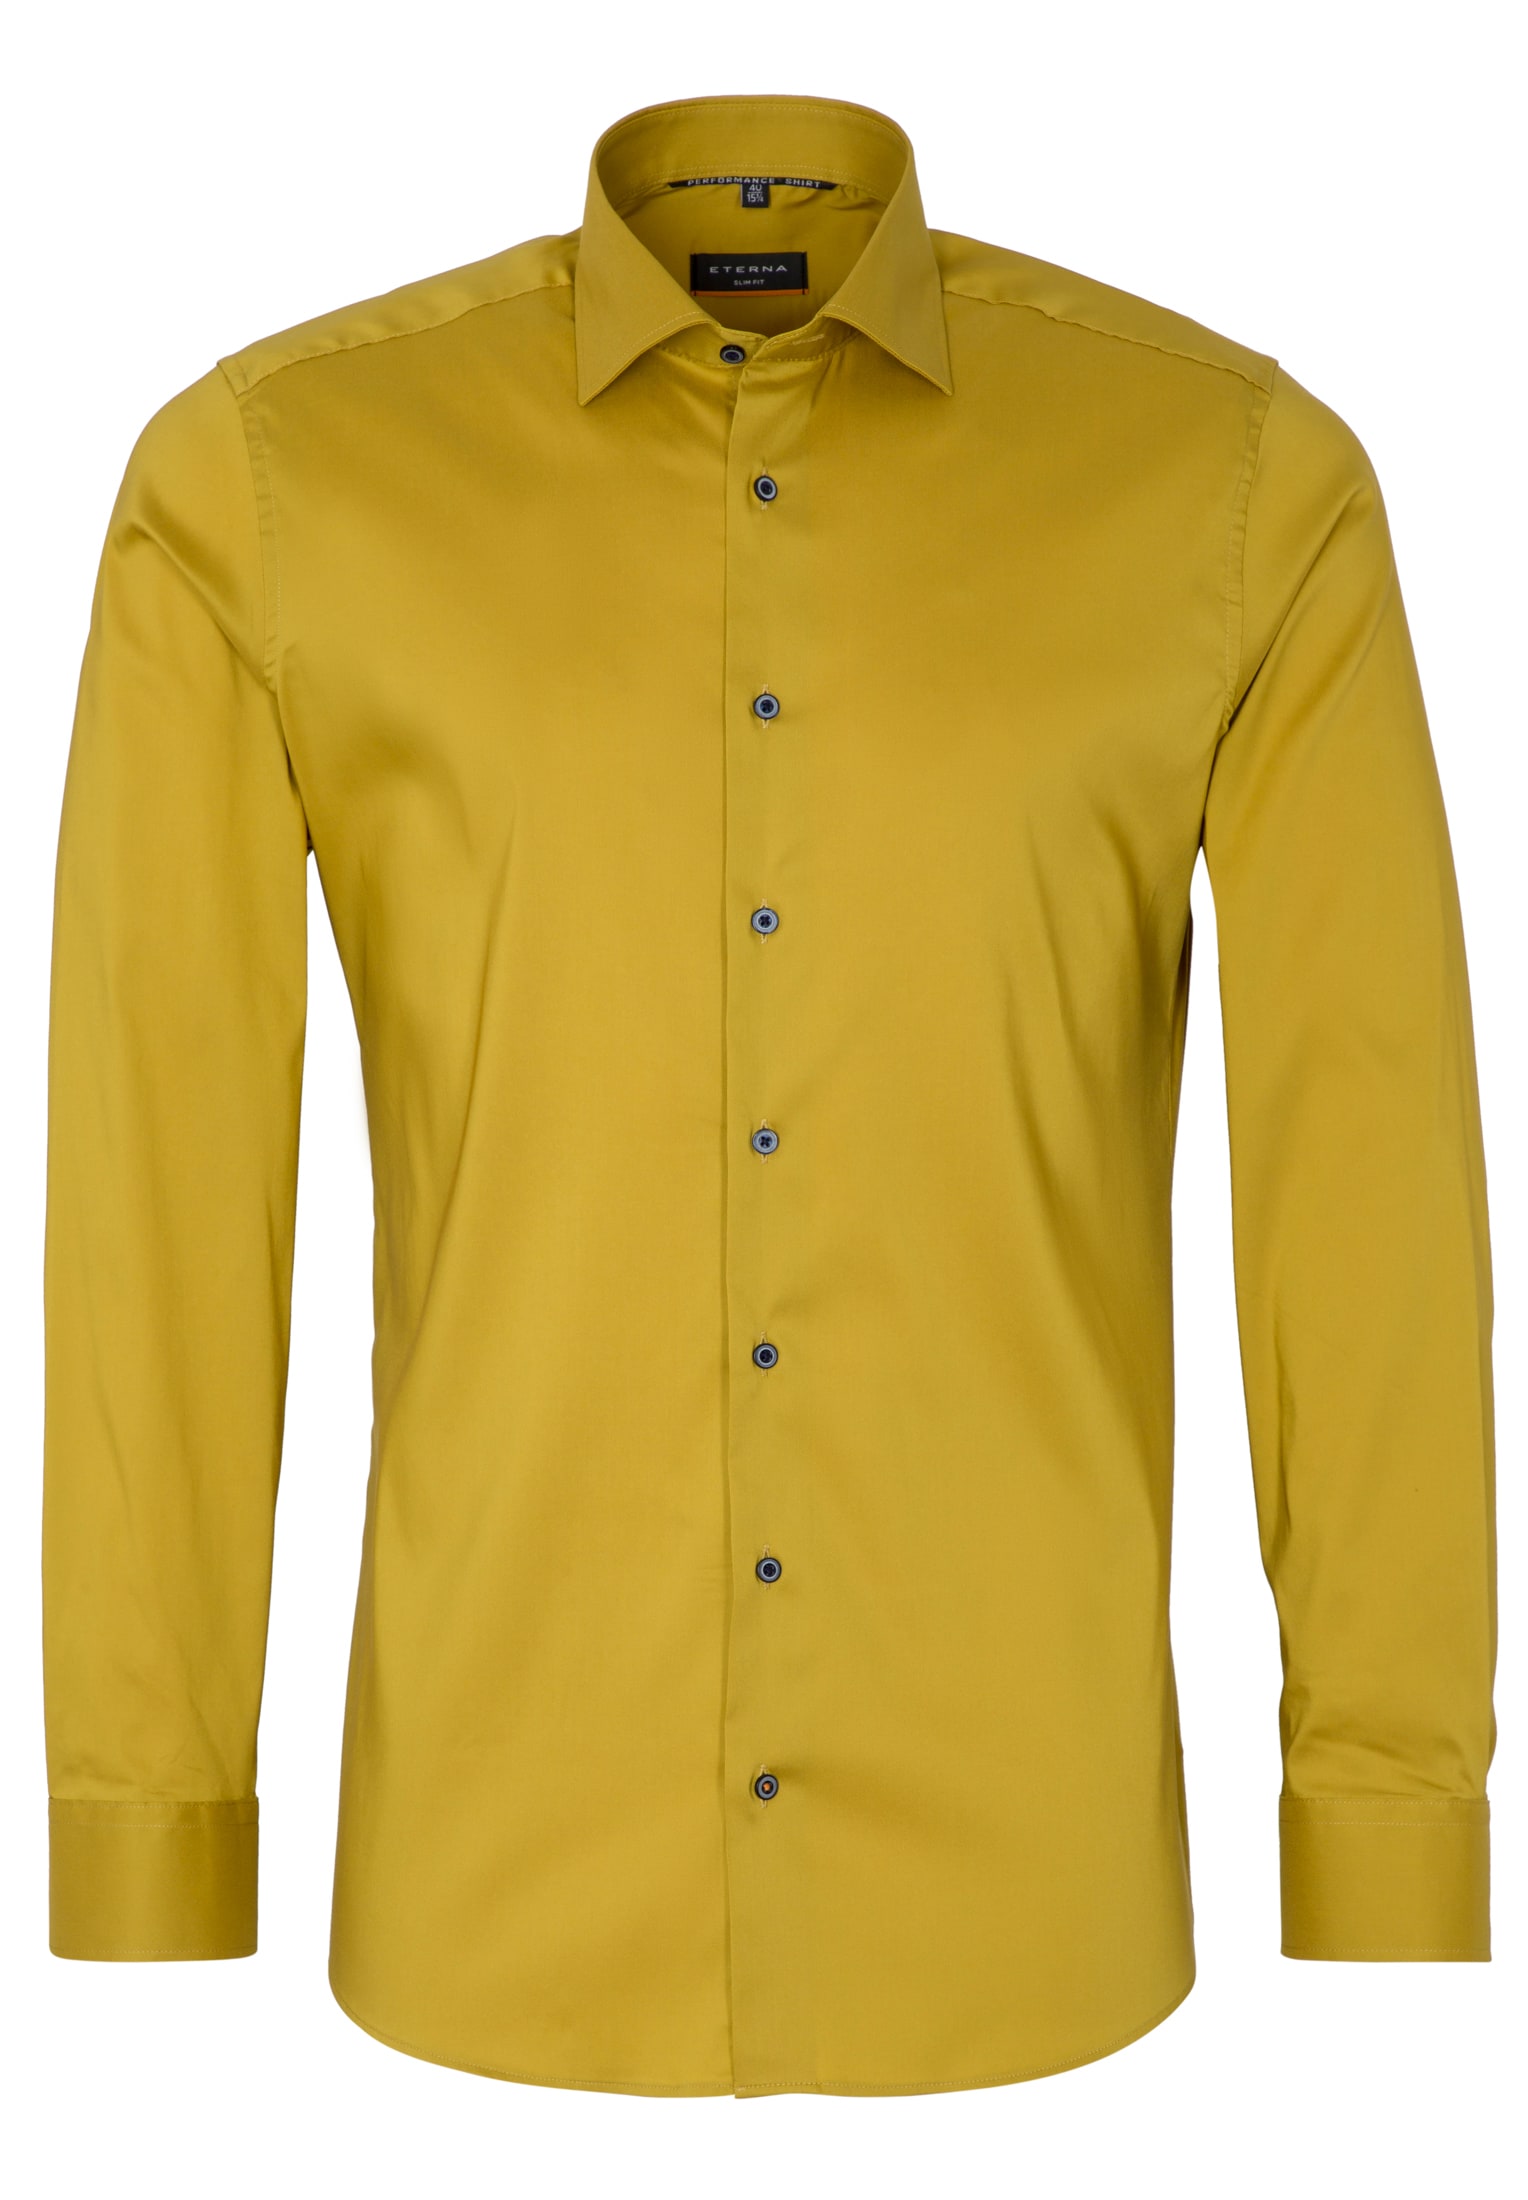 SLIM FIT Performance Shirt in curry plain | curry | 44 | long sleeve |  1SH02217-07-61-44-1/1